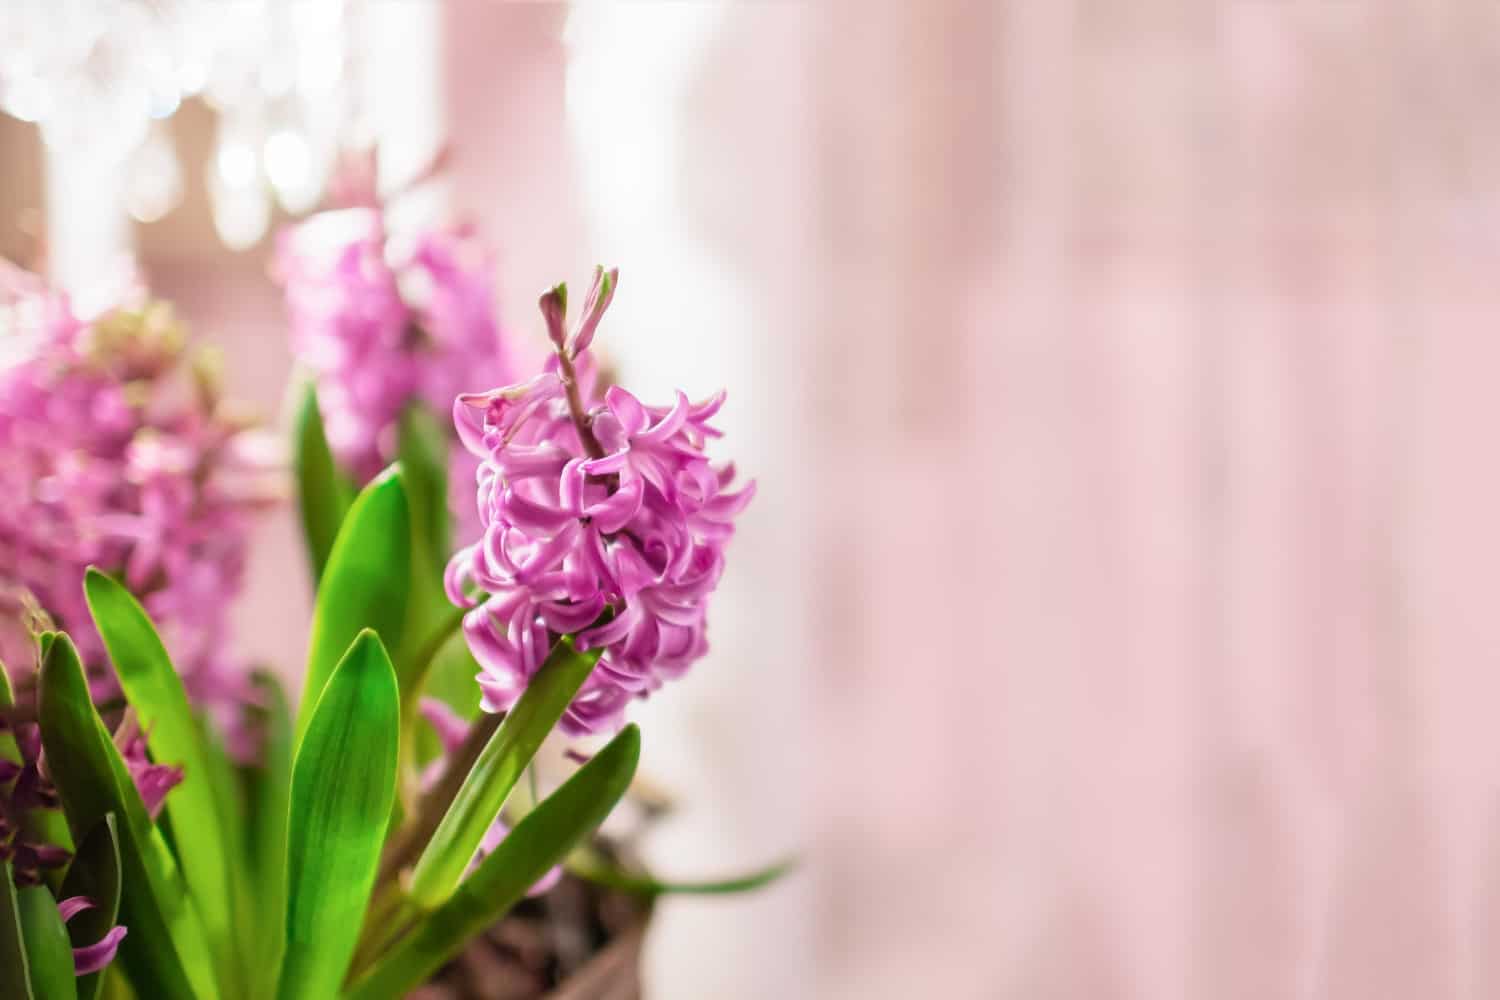 What to do with hyacinth after flowering?